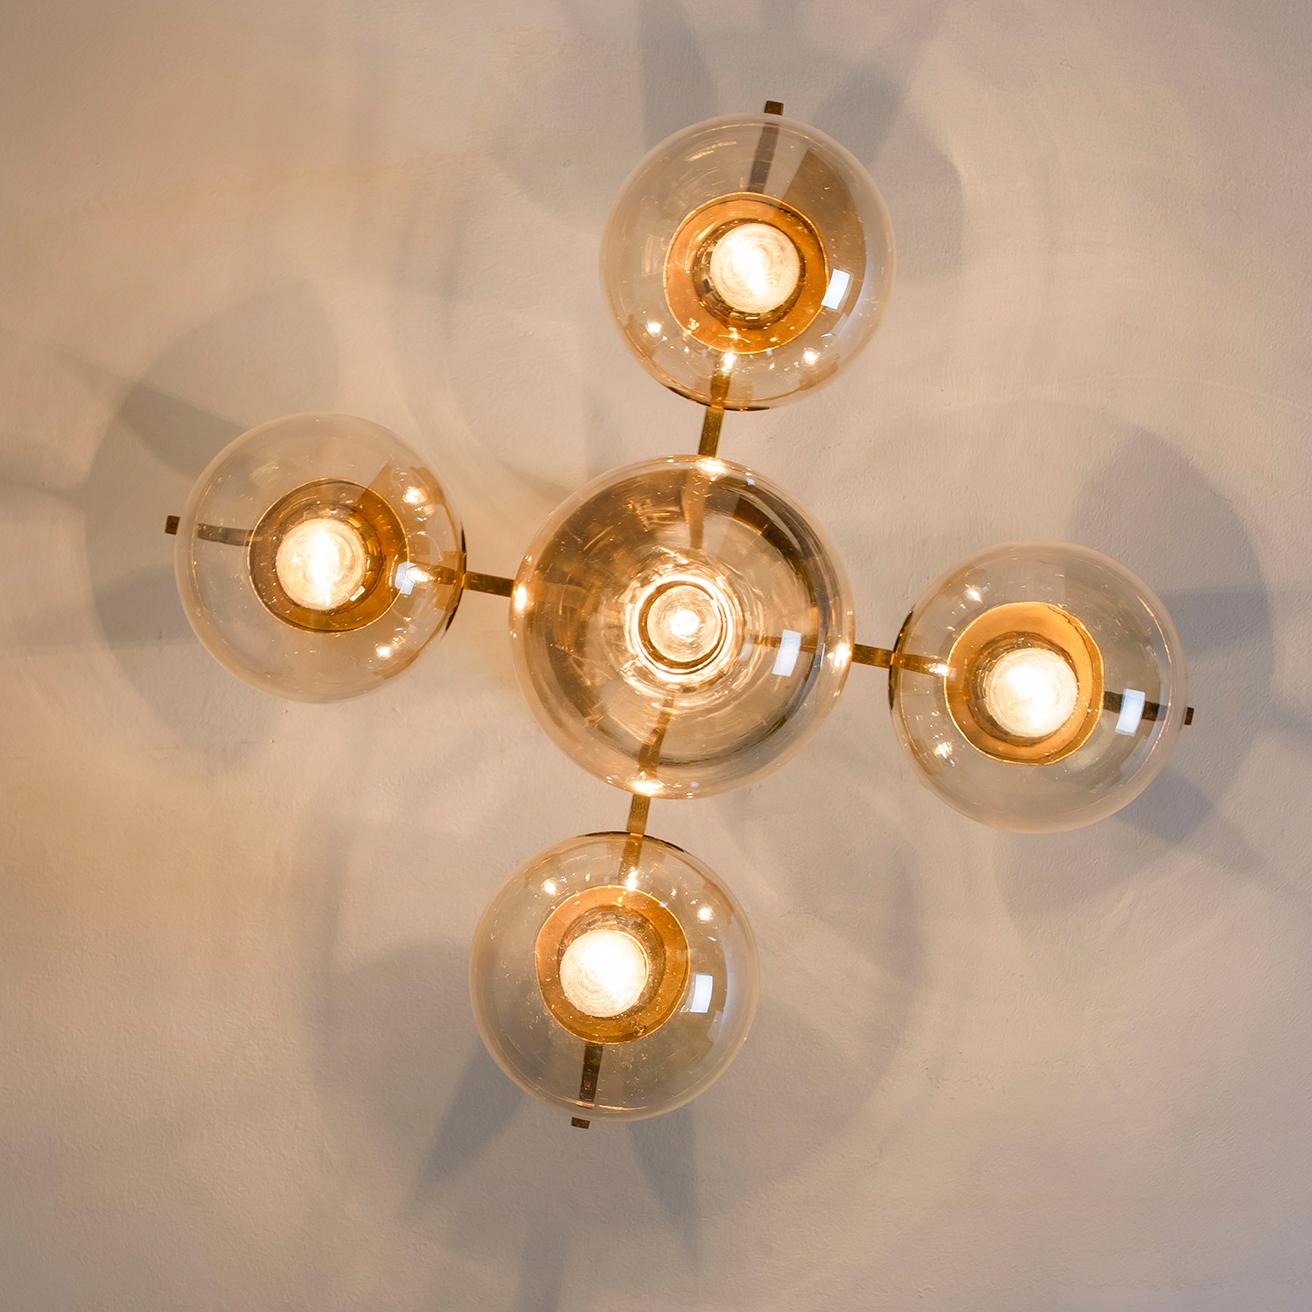 Set of Three Brass and Glass Light Fixtures in the Style of Jakobsson, 1960s For Sale 7